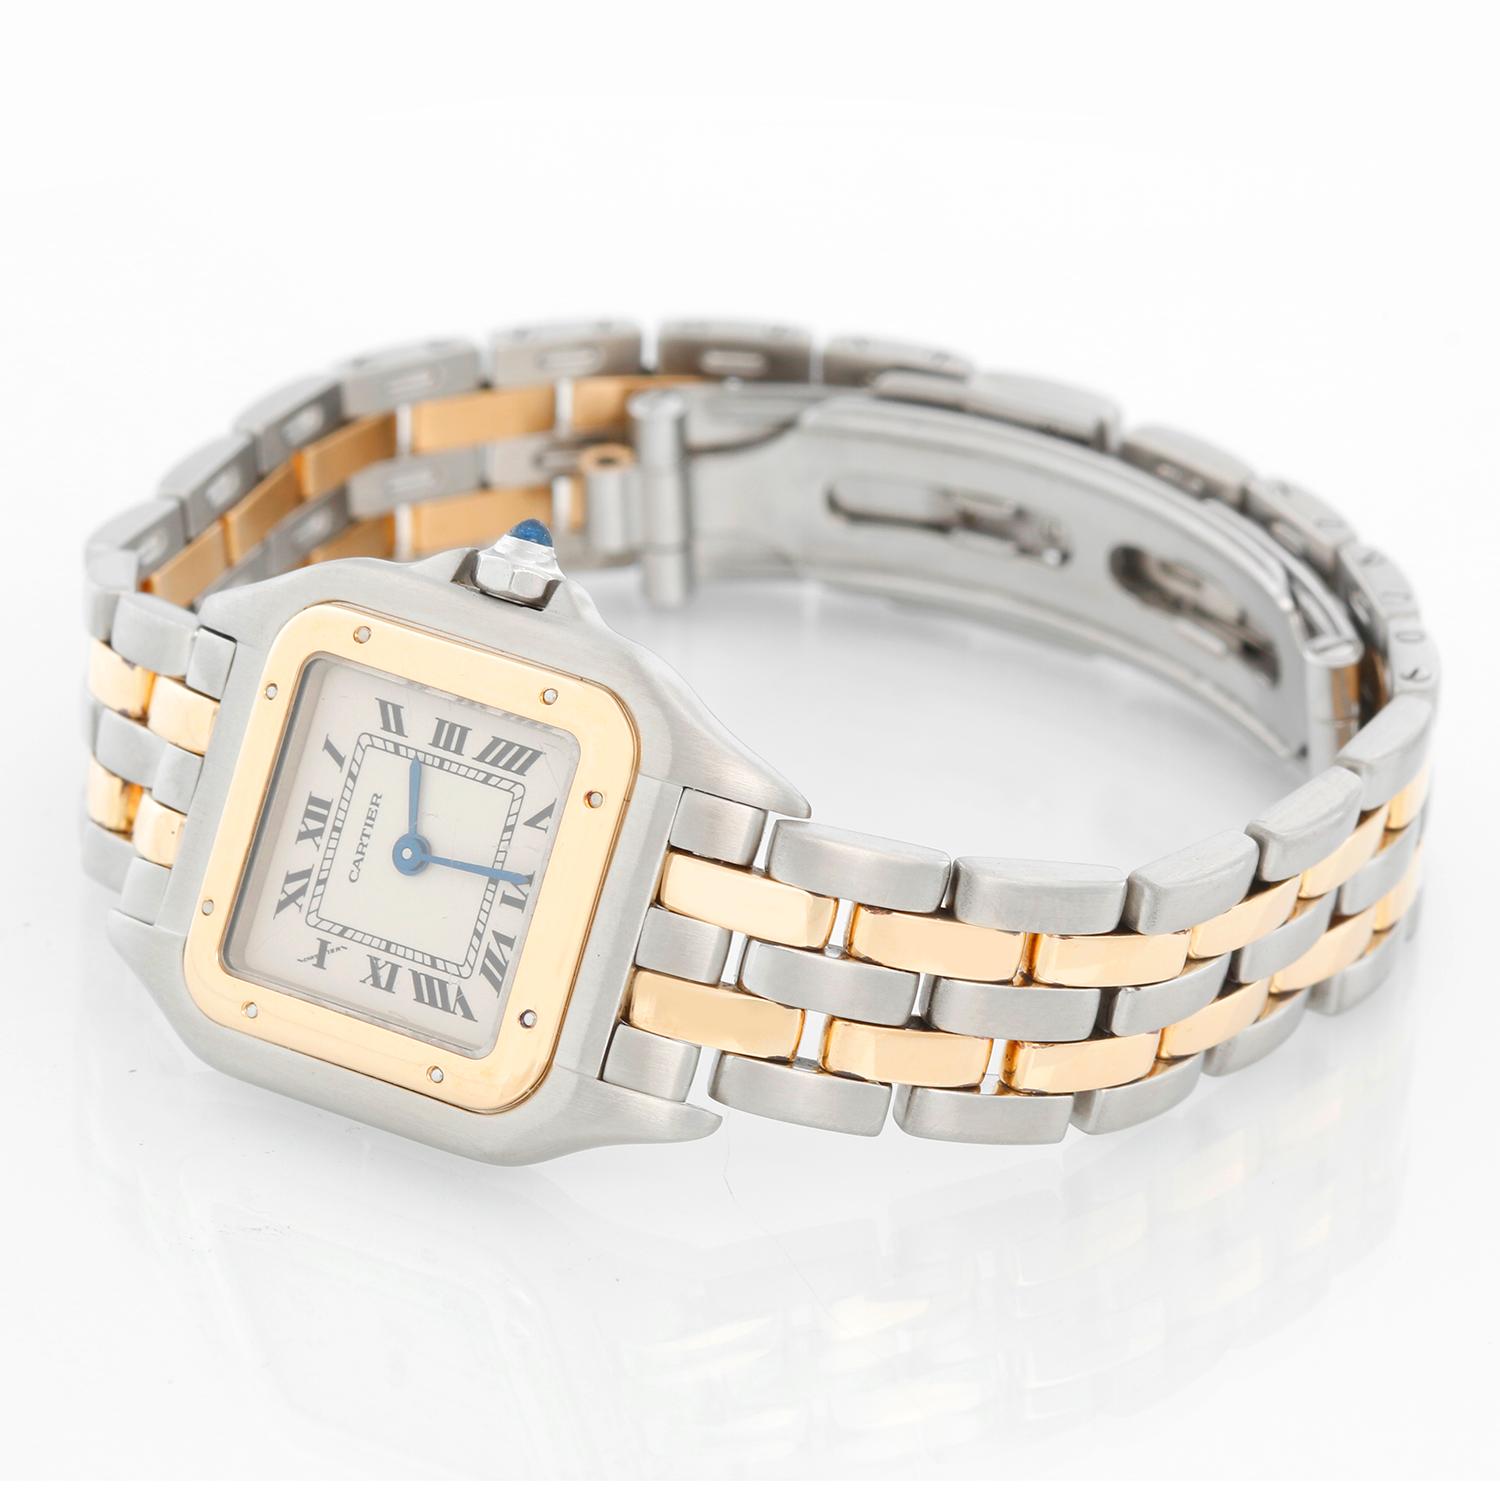 Cartier Panther Ladies 2-Tone 2-Row Steel & Gold Watch W25029B6 -  Quartz. Stainless steel case with 18k yellow gold bezel (21mm x 30mm). Ivory colored dial with black Roman numerals. Stainless steel and 2-row 18k yellow gold Panthere bracelet.